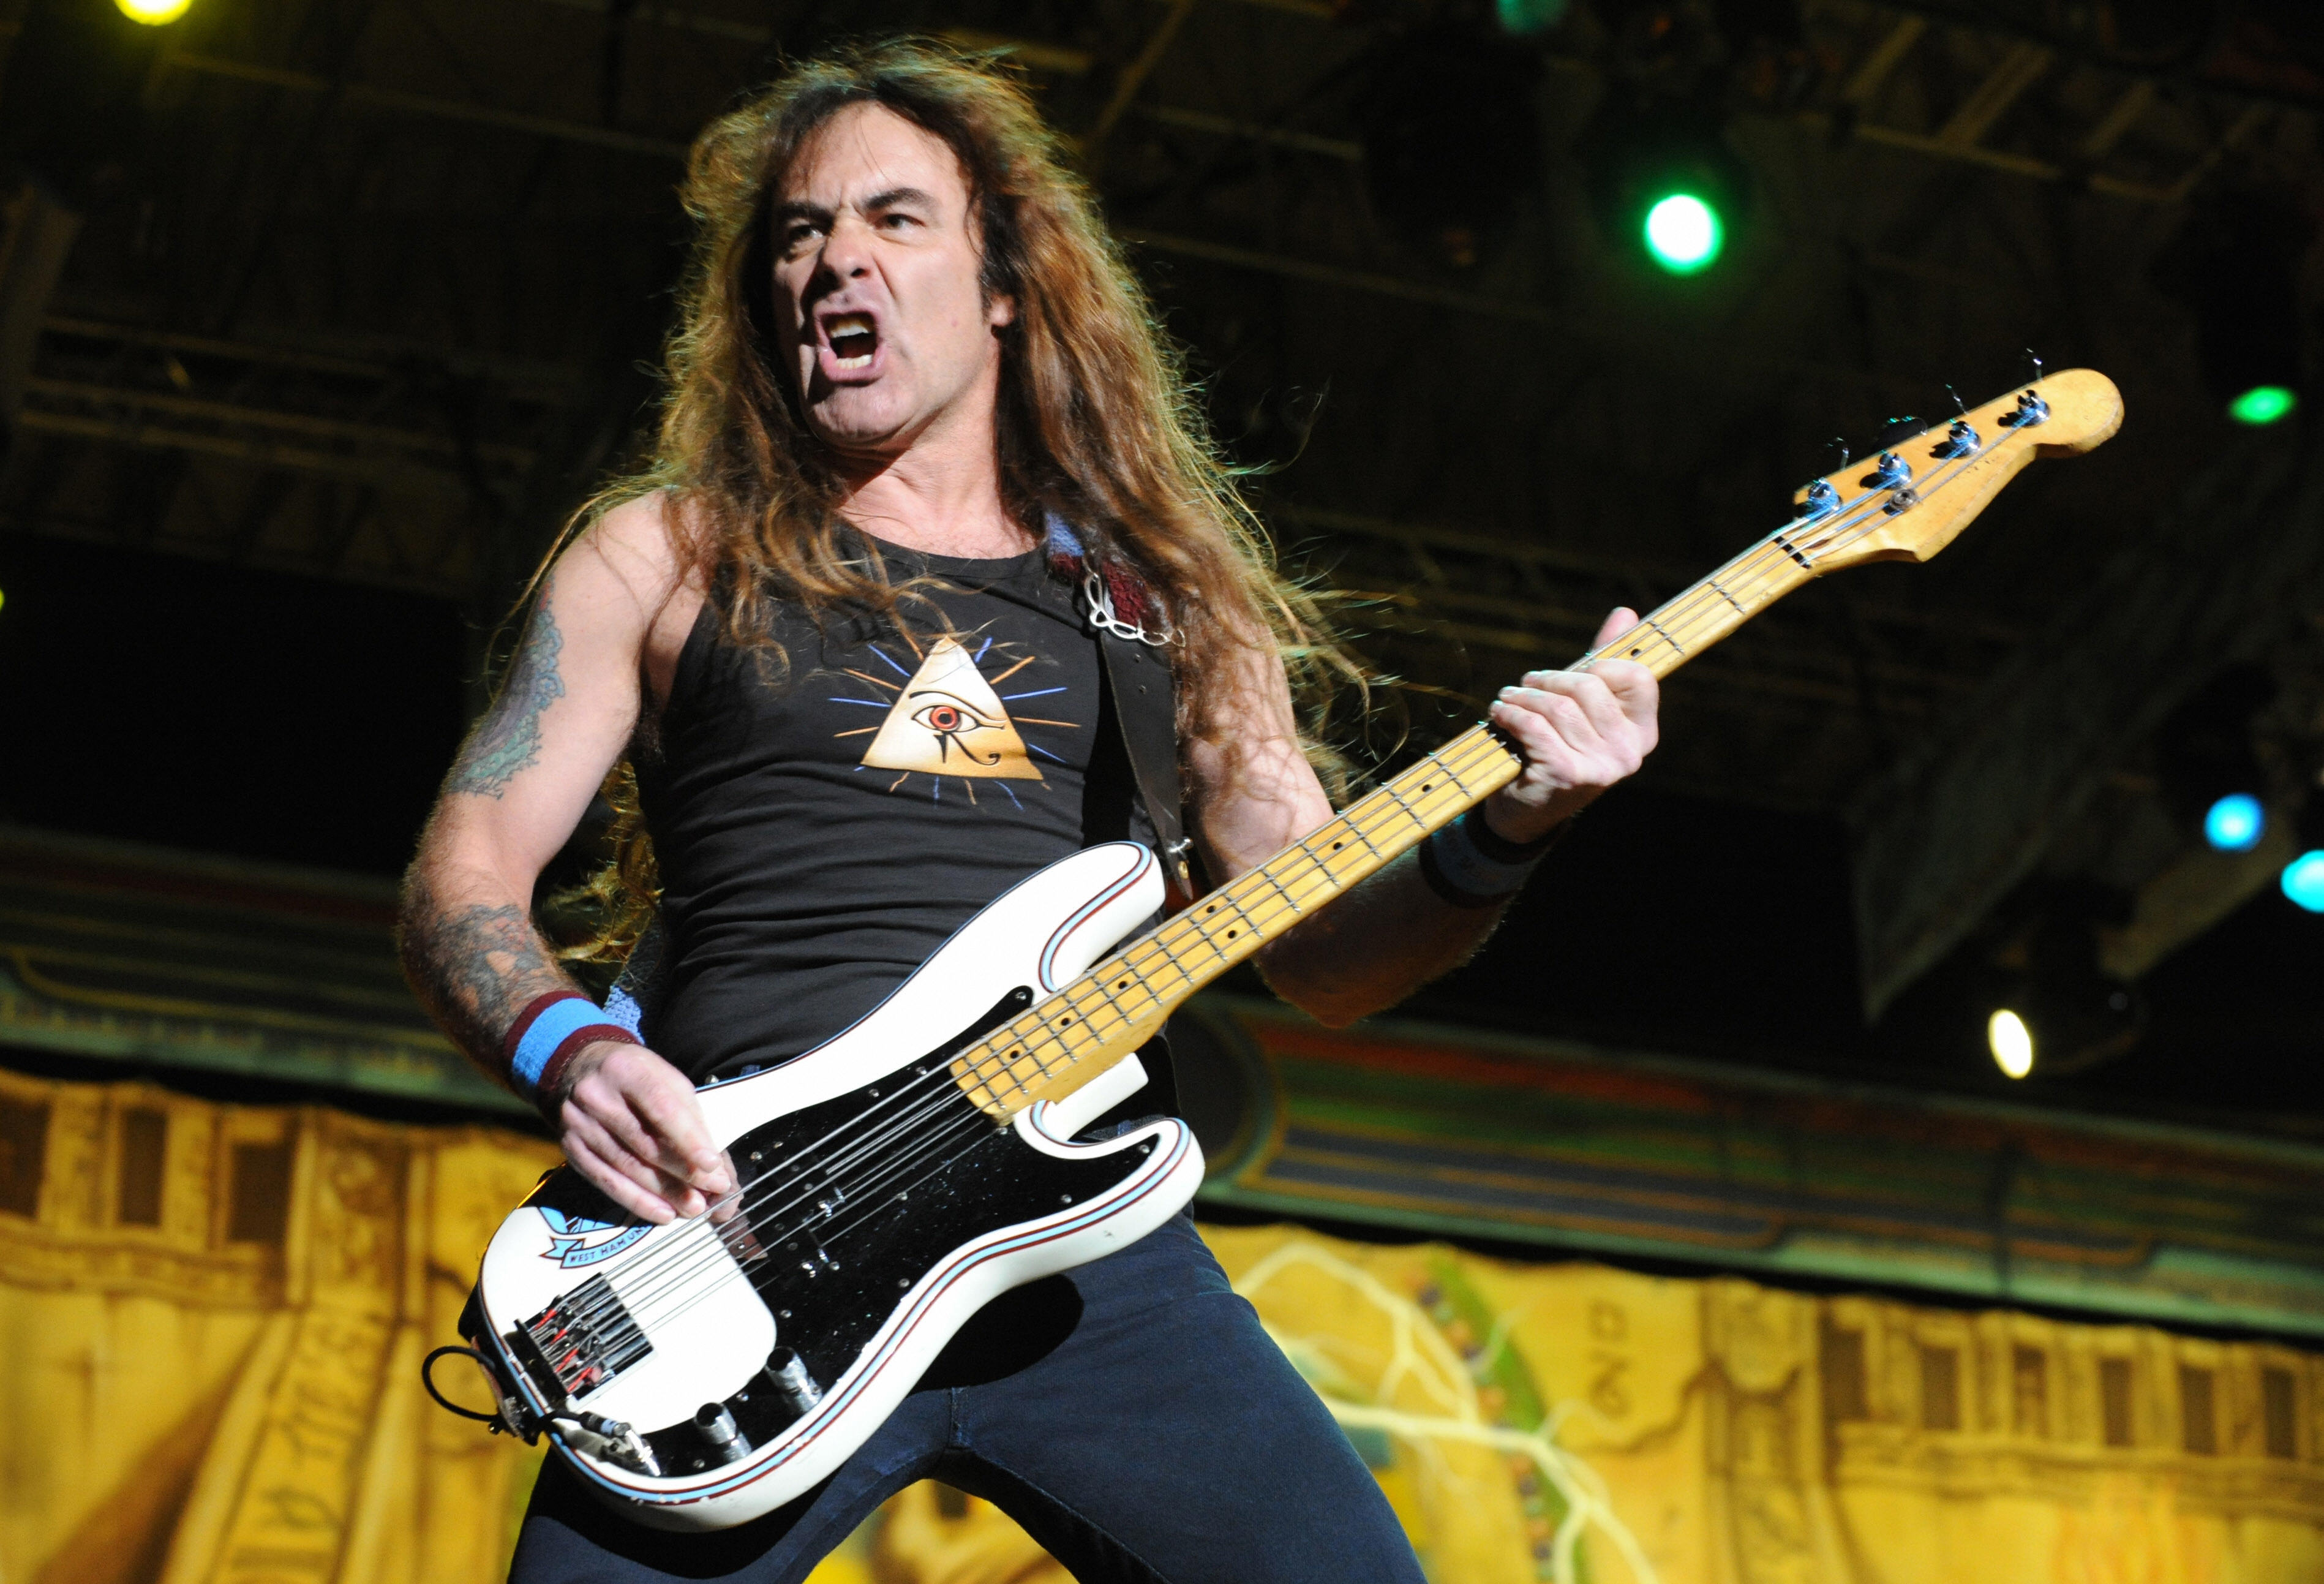 Steve Harris founded Iron Maiden in 1975.